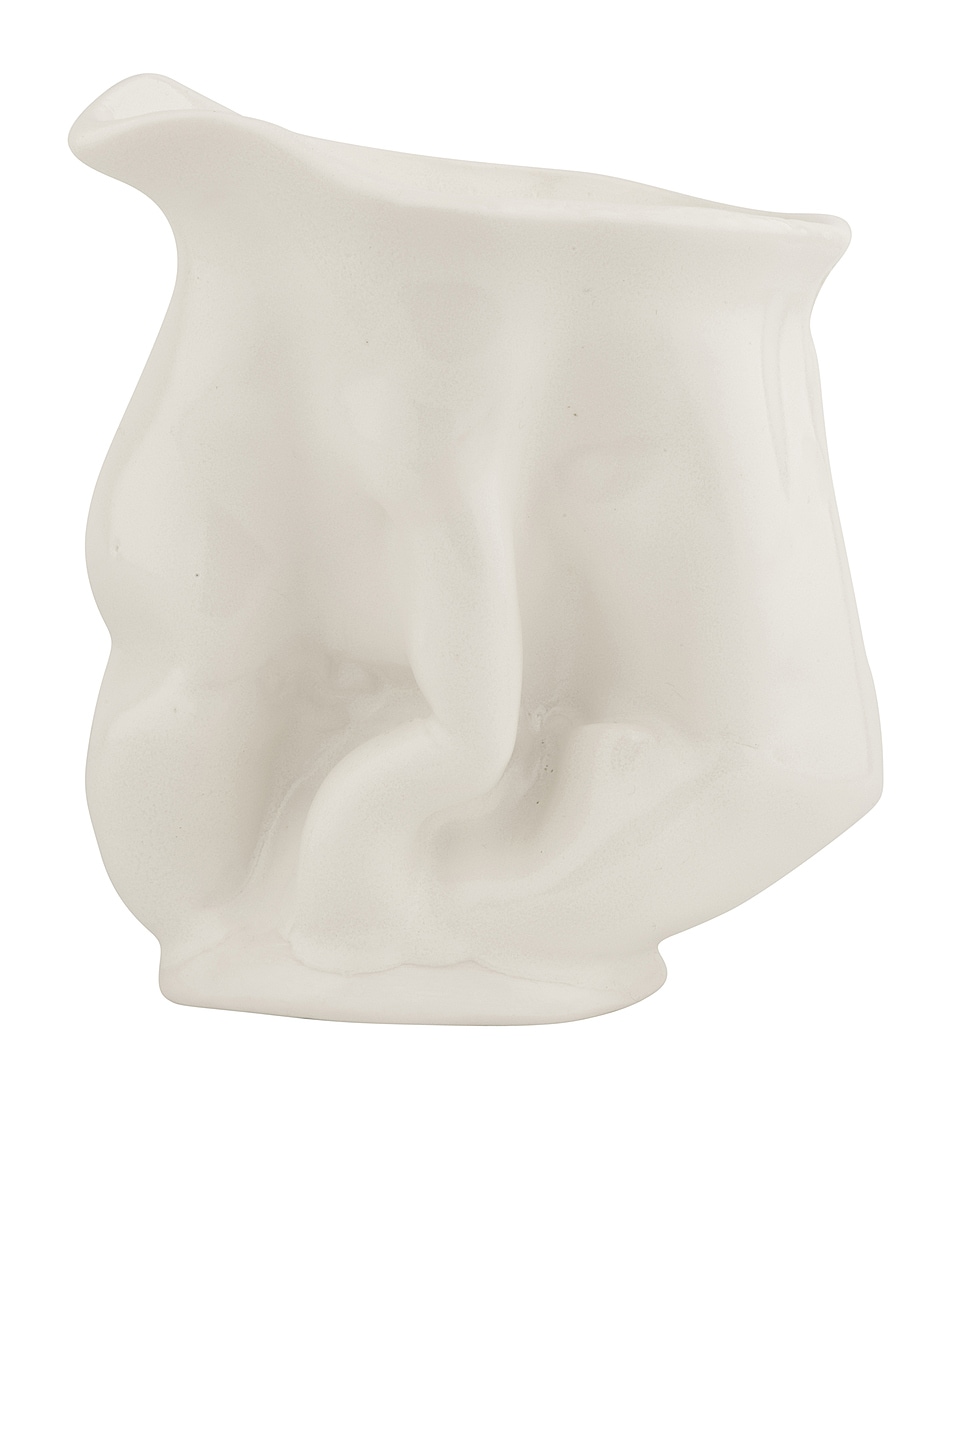 Image 1 of Completedworks Pour Jug in White